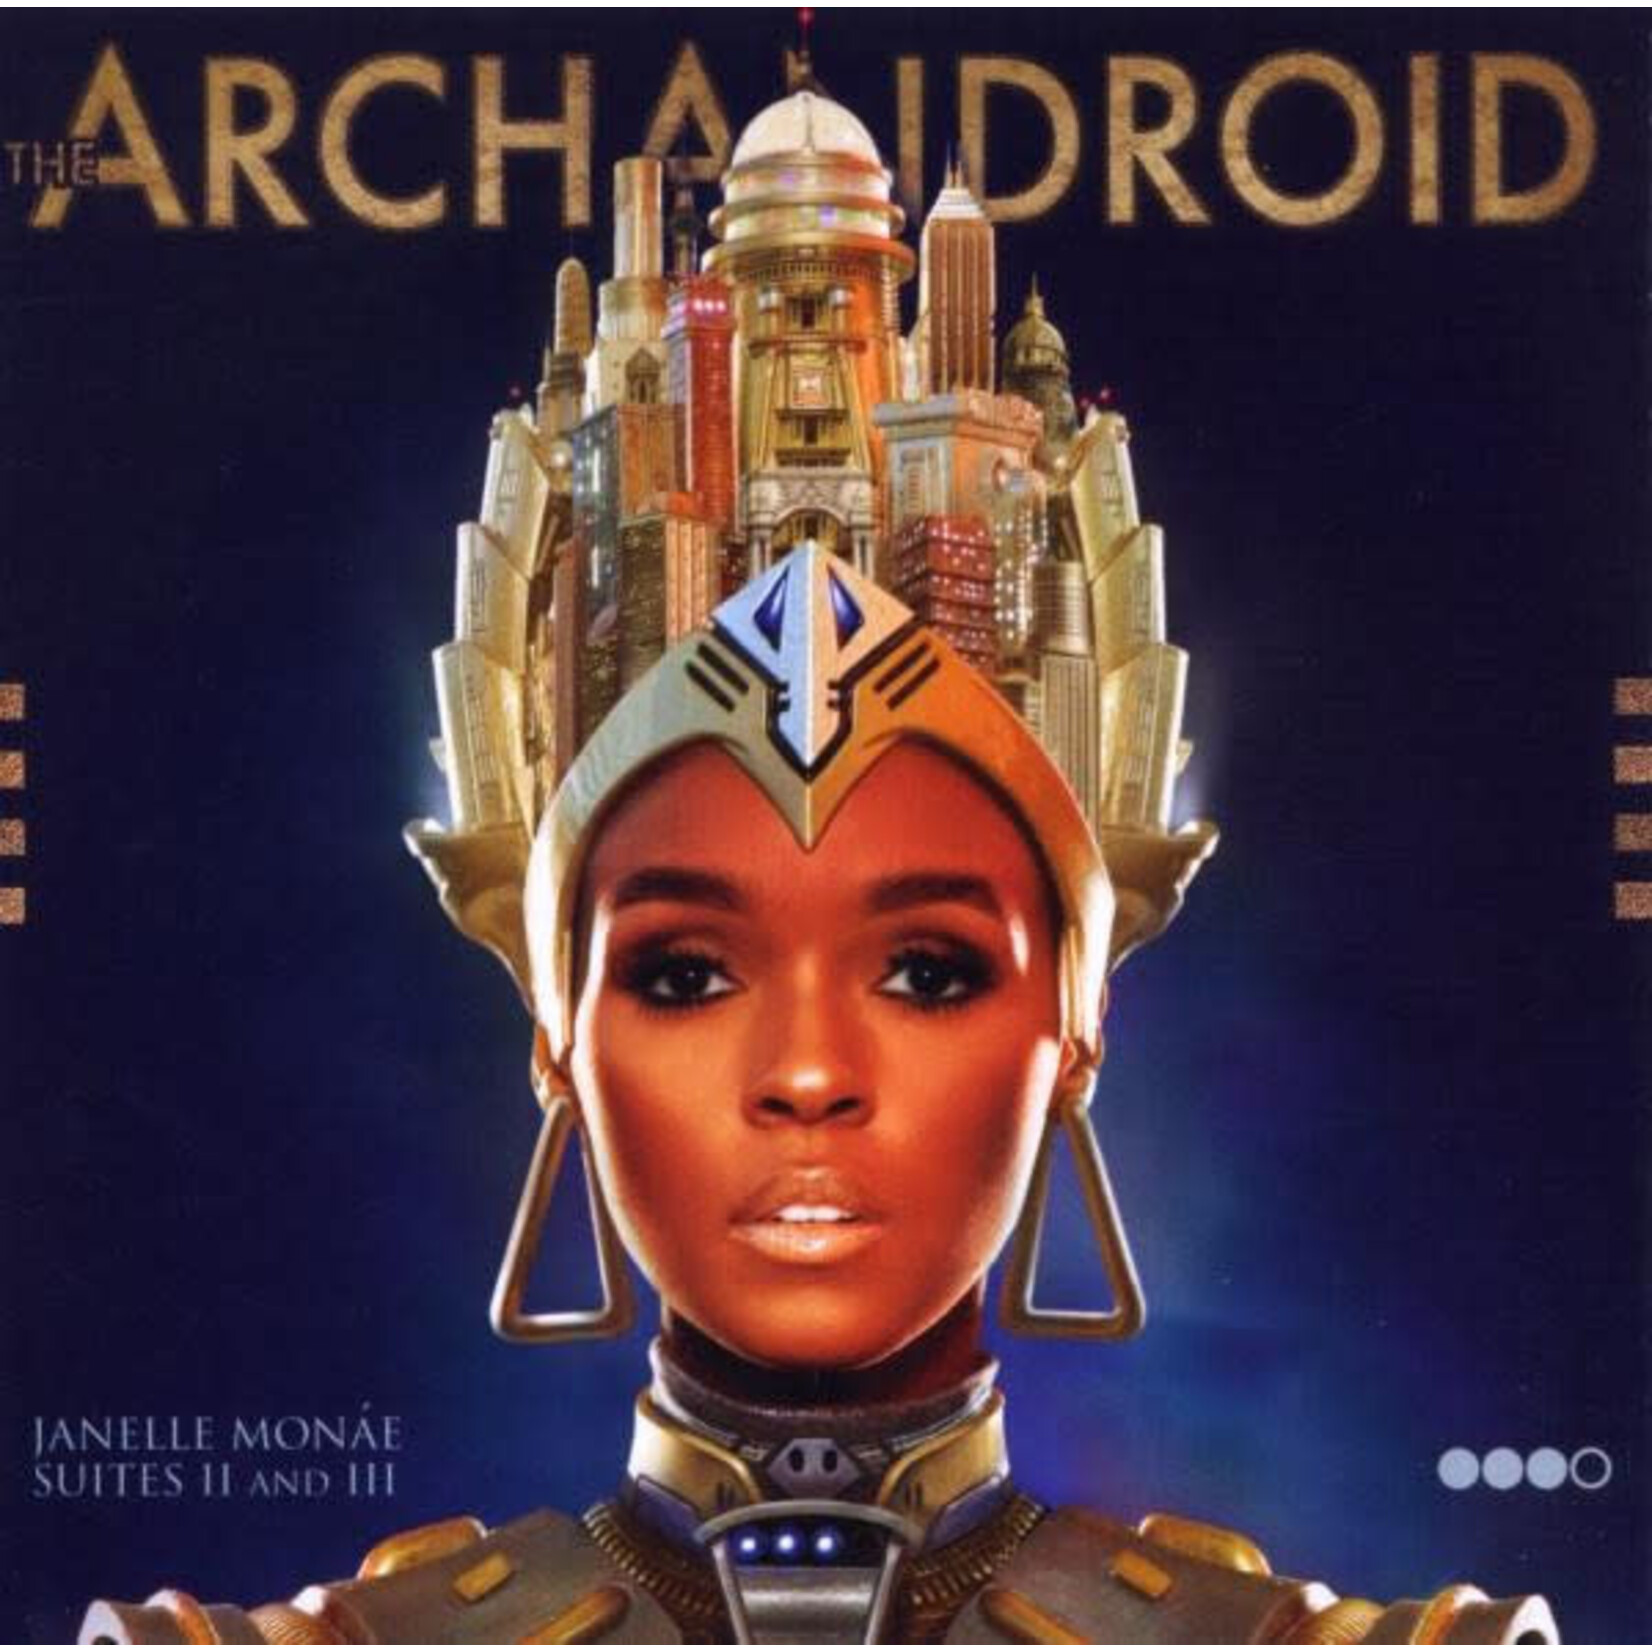 [New] Janelle Monae - The Archandroid